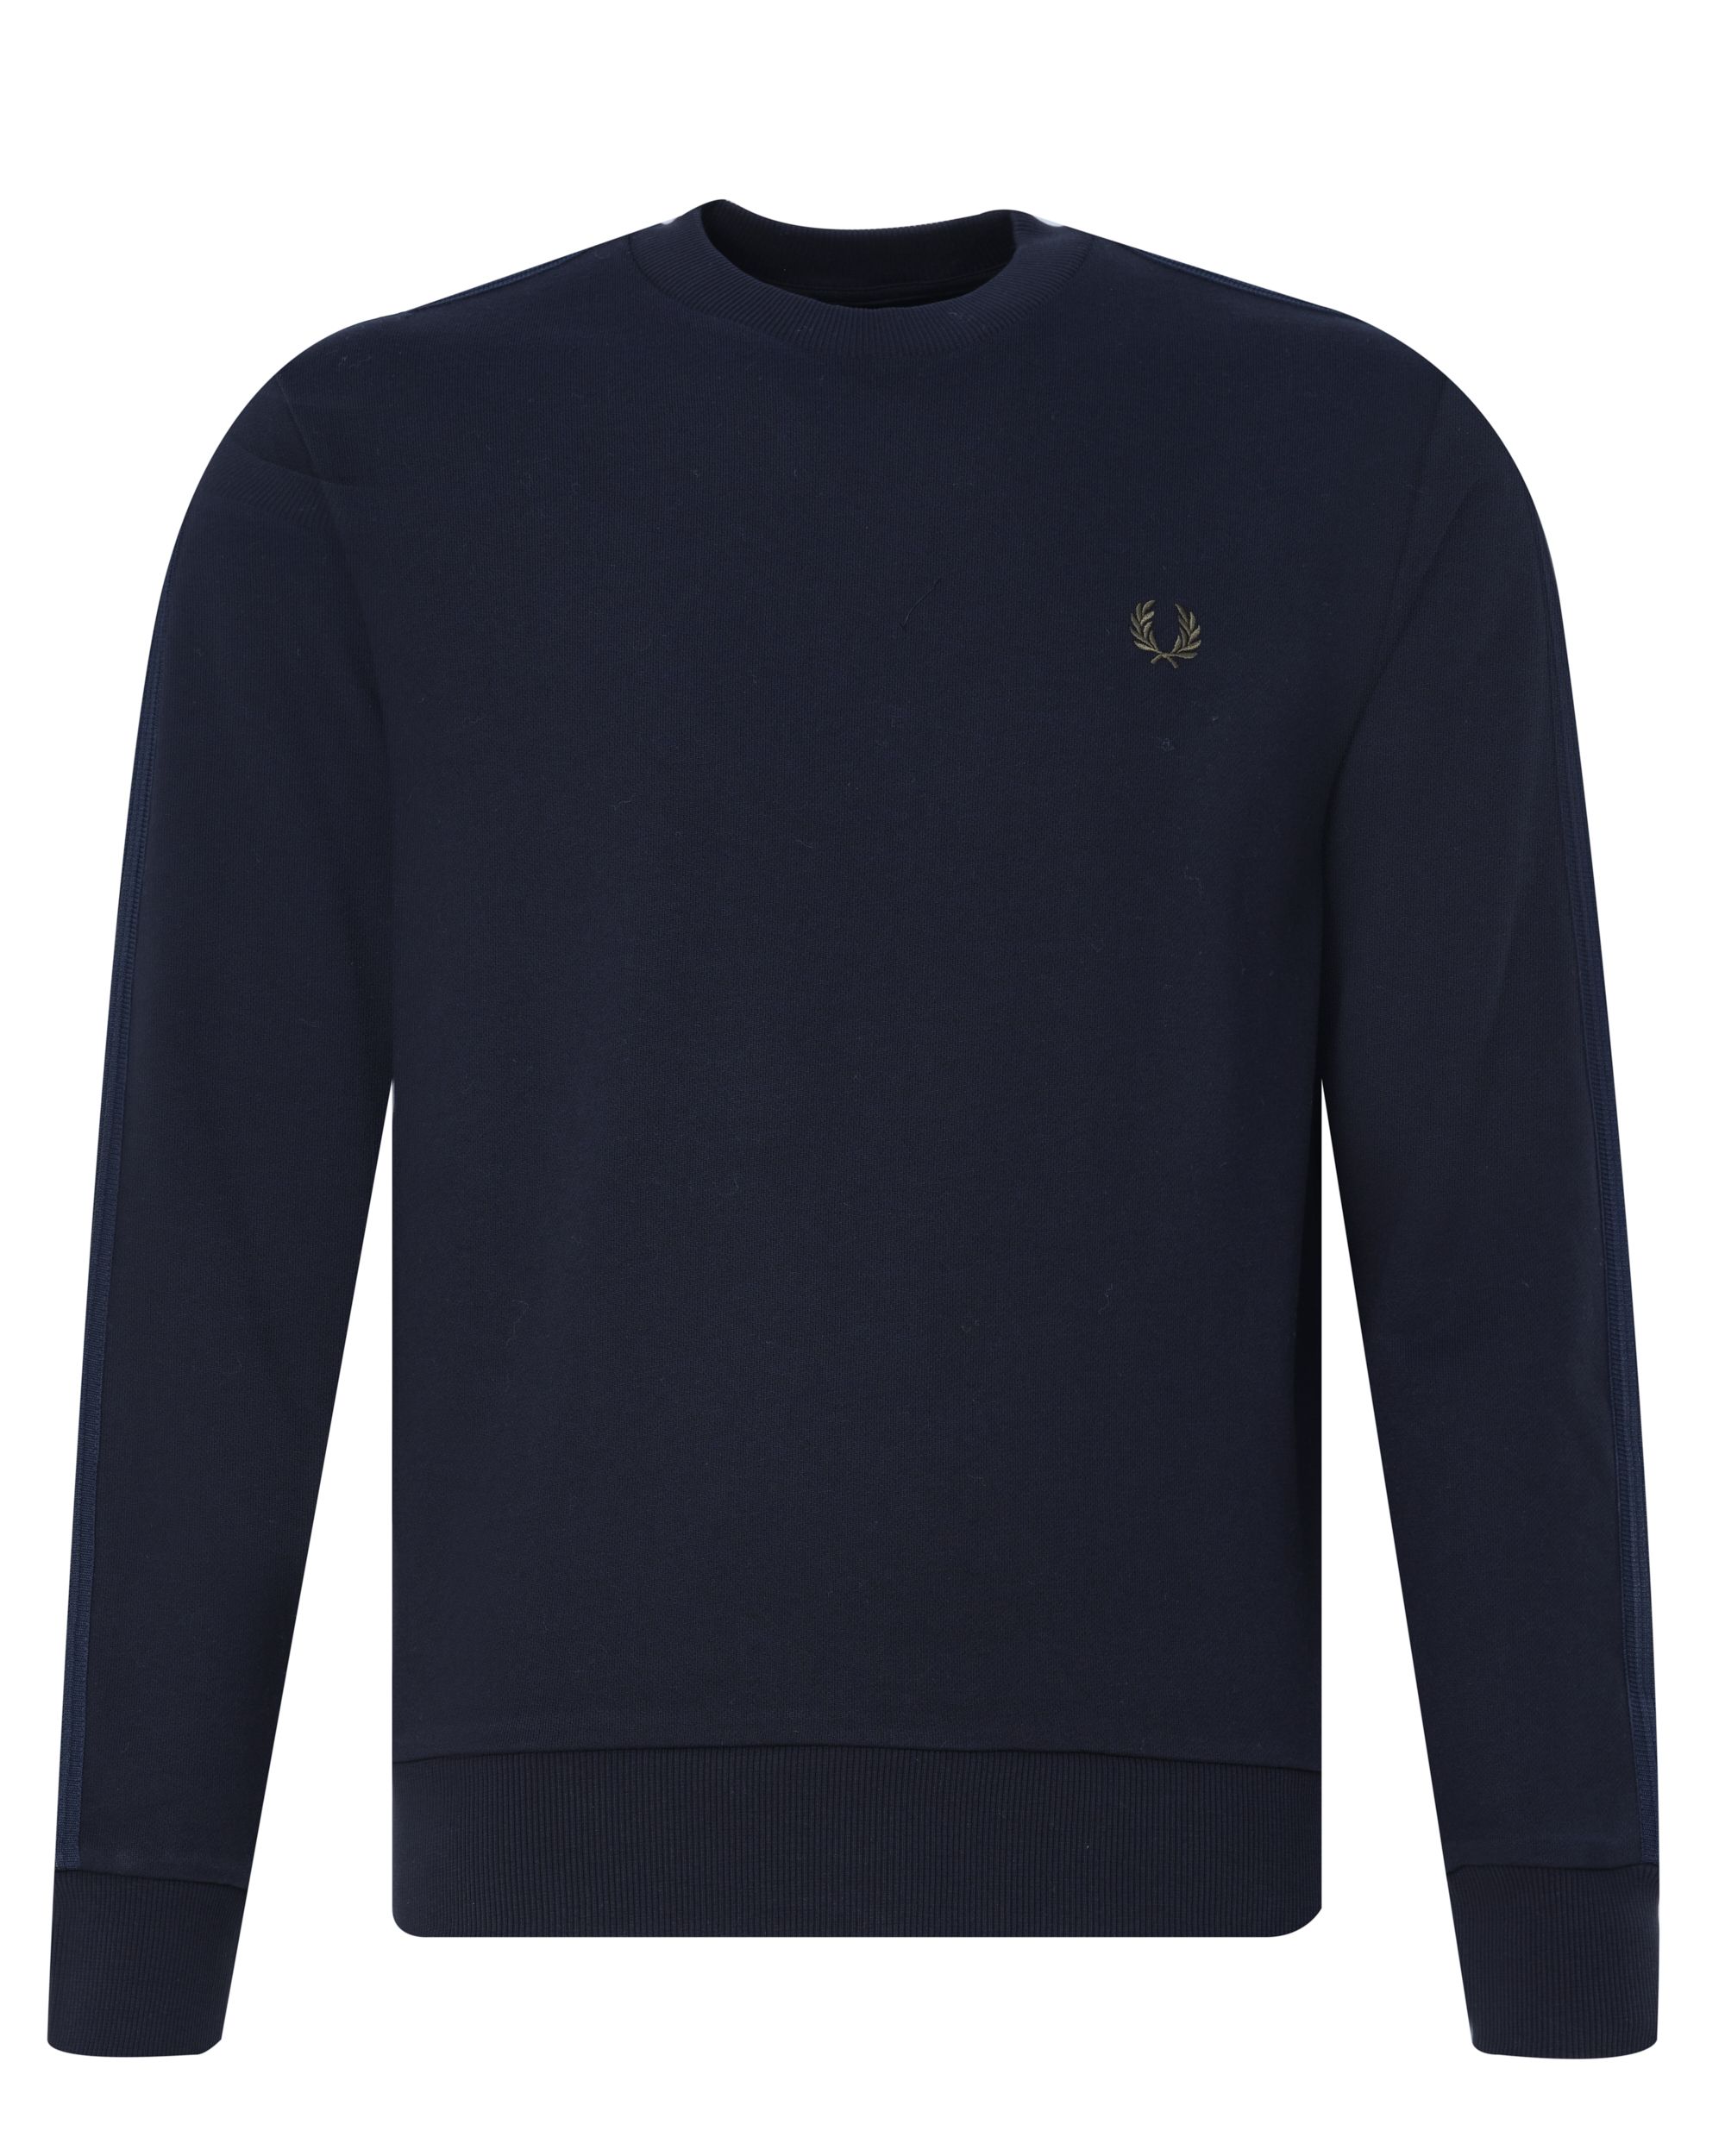 Fred Perry Sweater Zwart 080355-001-L